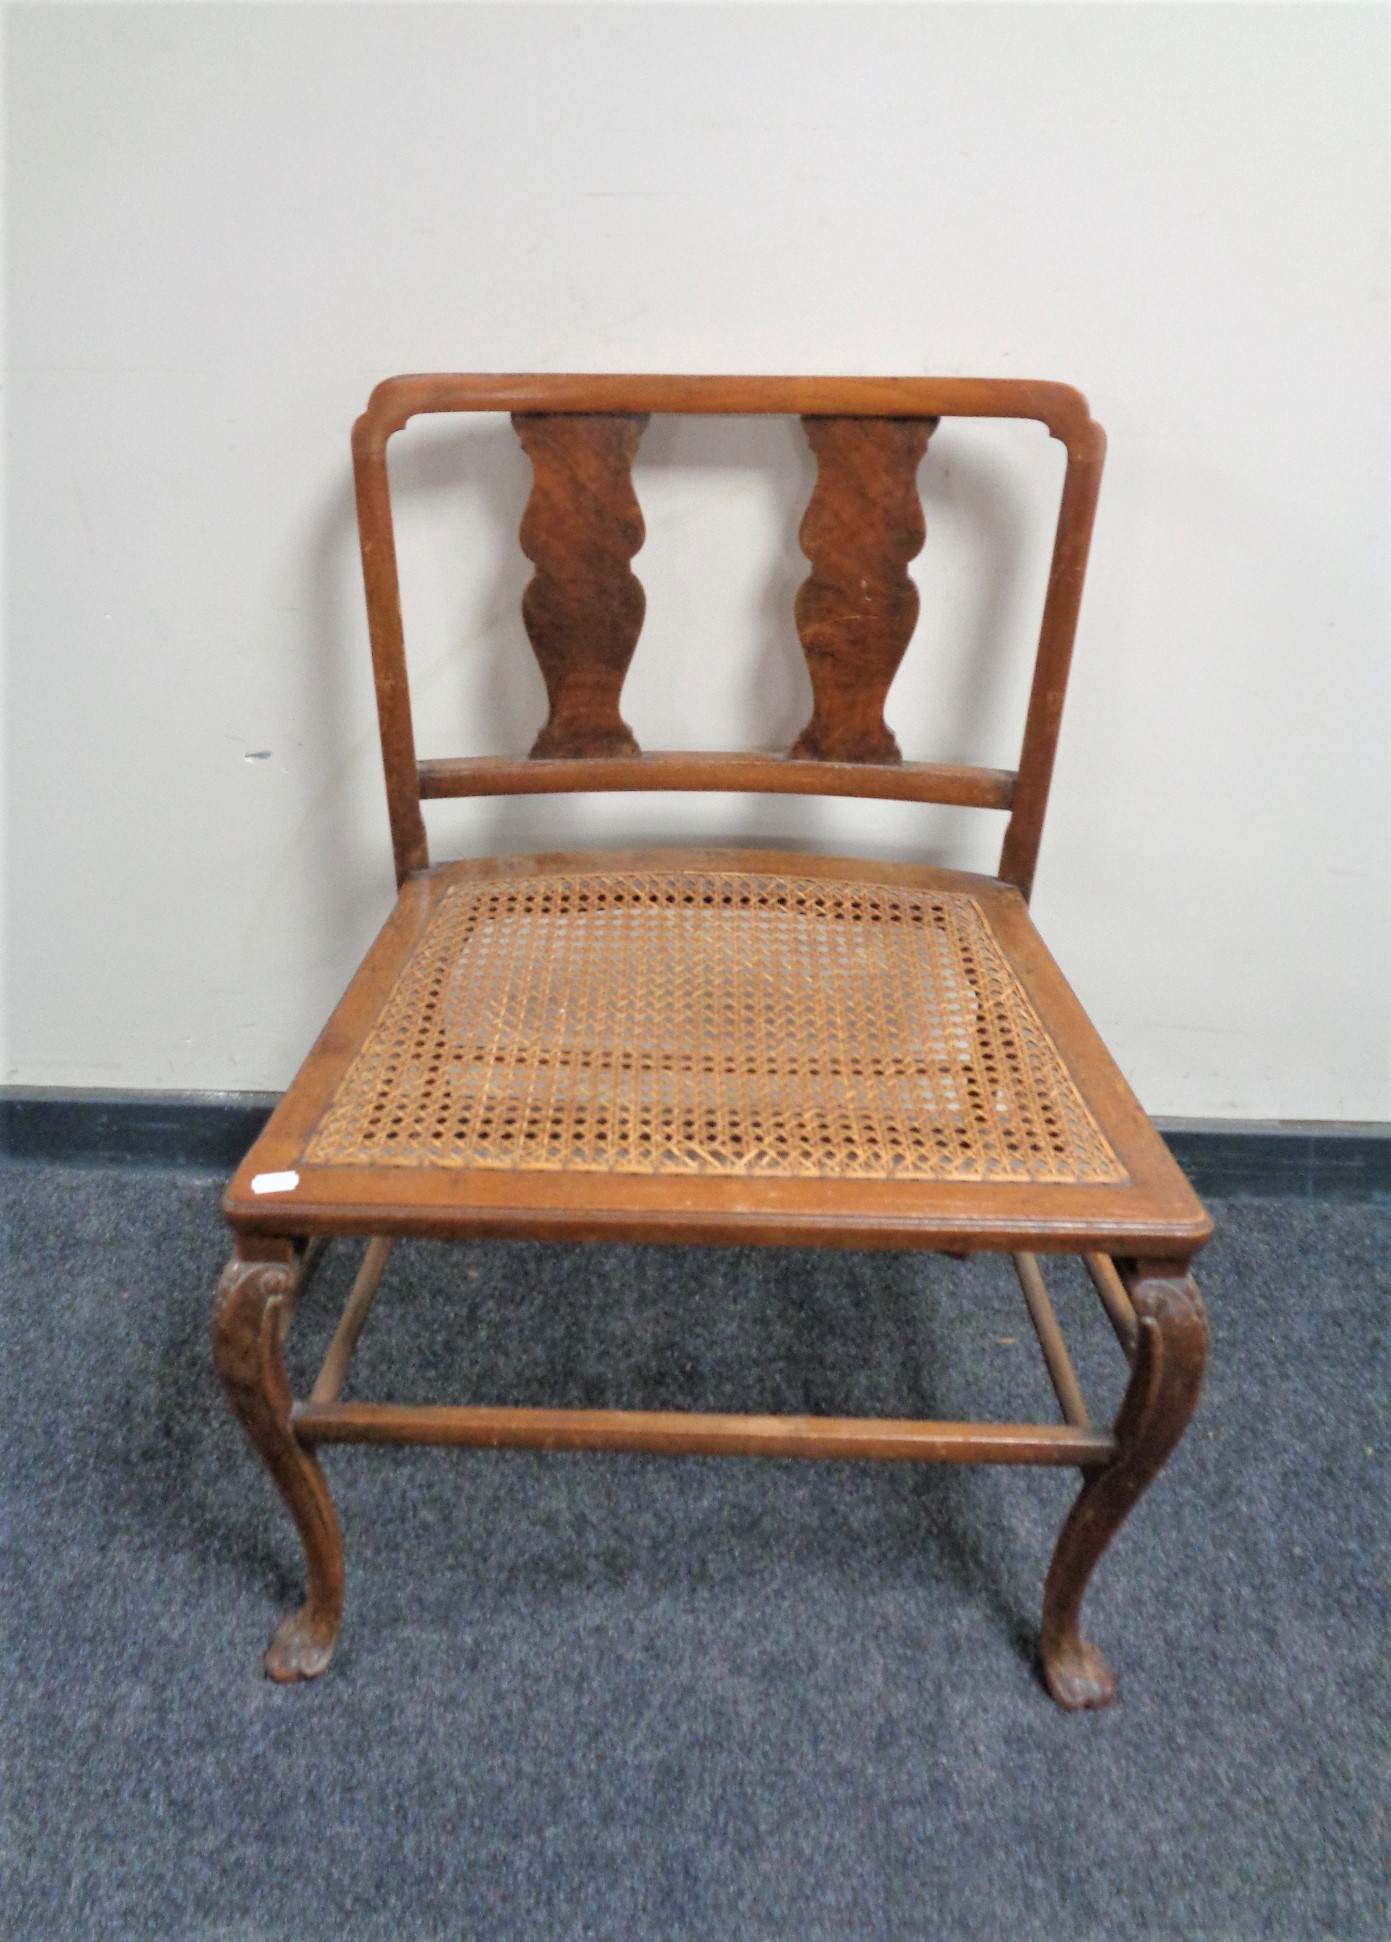 An Edwardian oversized dressing table chair with bergere seat.